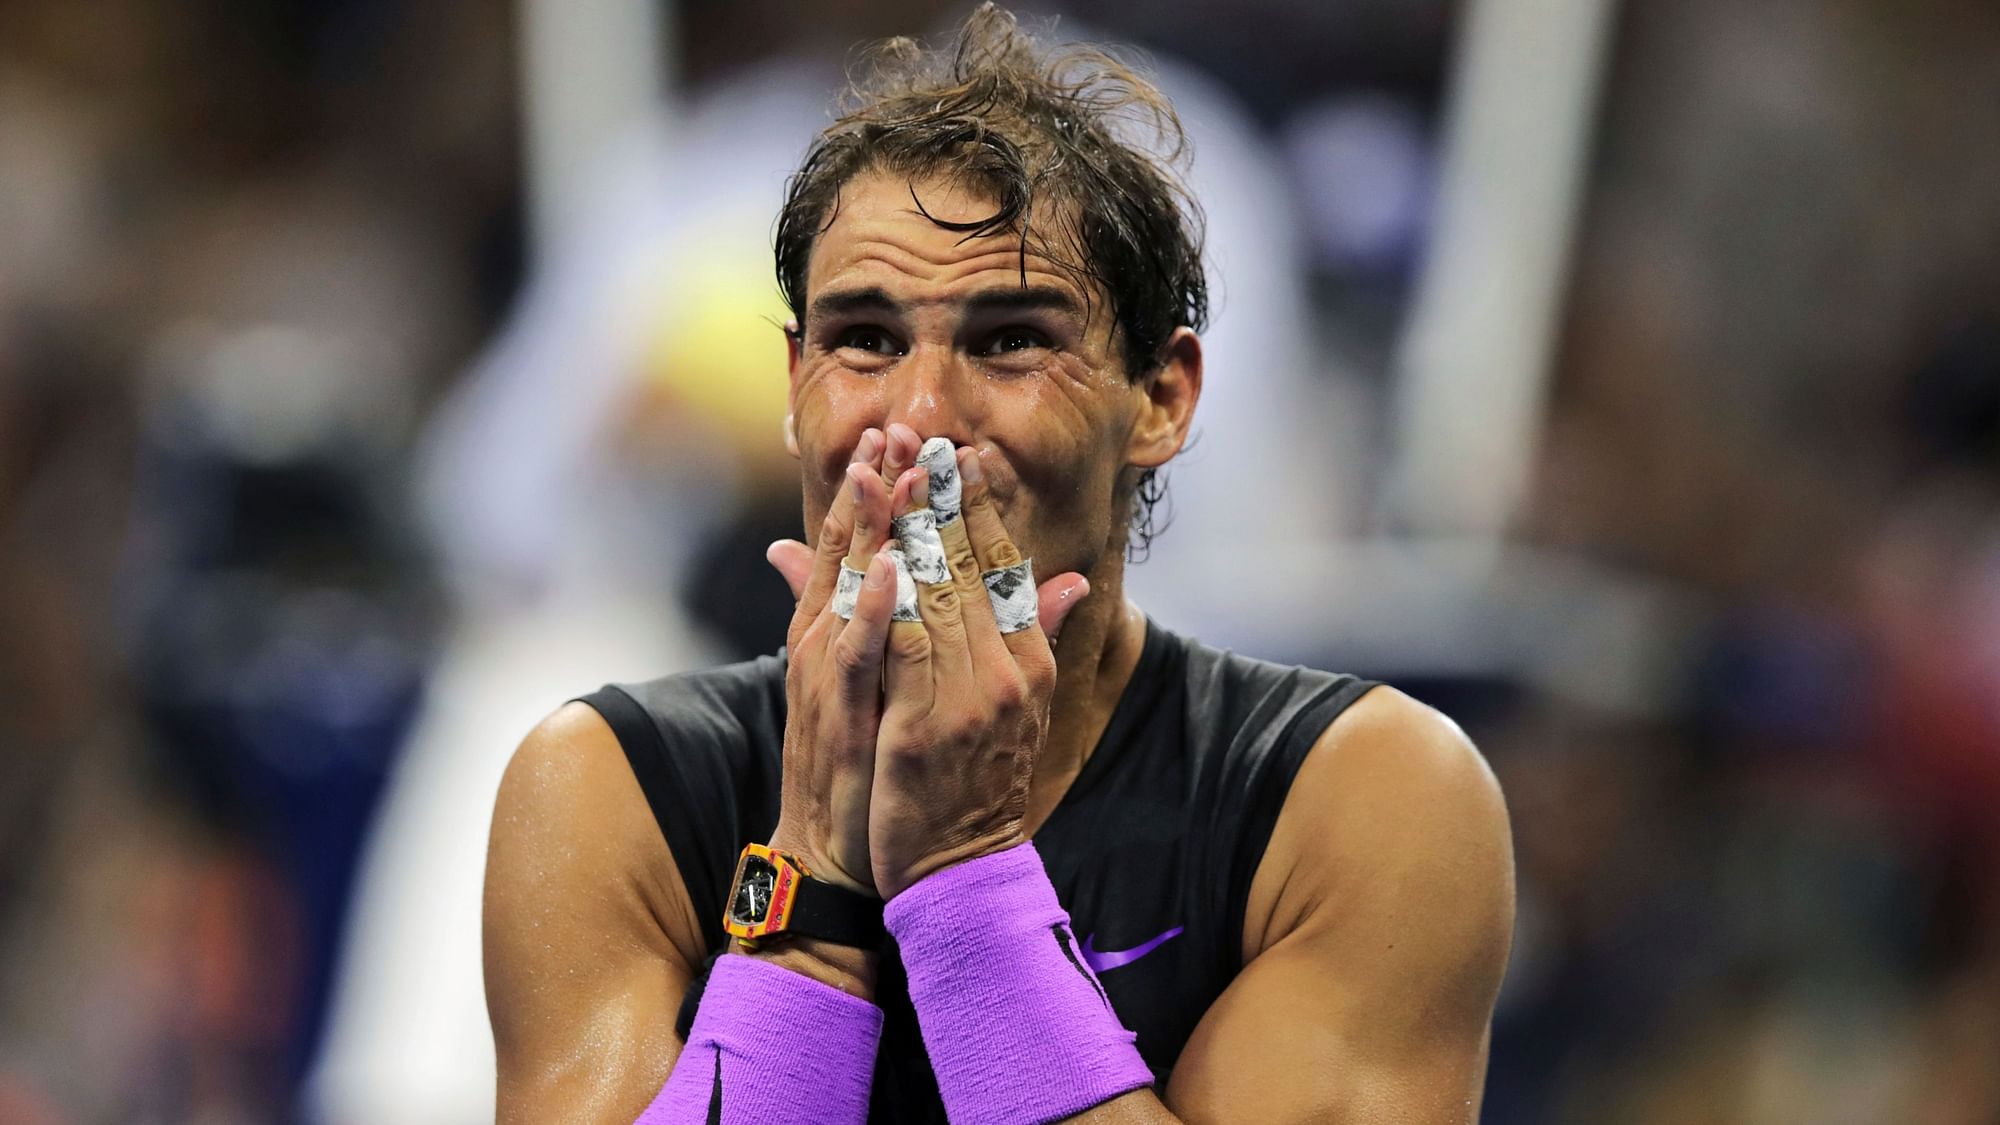 Rafael Nadal, of Spain, reacts after defeating Daniil Medvedev, of Russia, to win the men’s singles final of the U.S. Open tennis championships Sunday, Sept. 8, 2019, in New York.